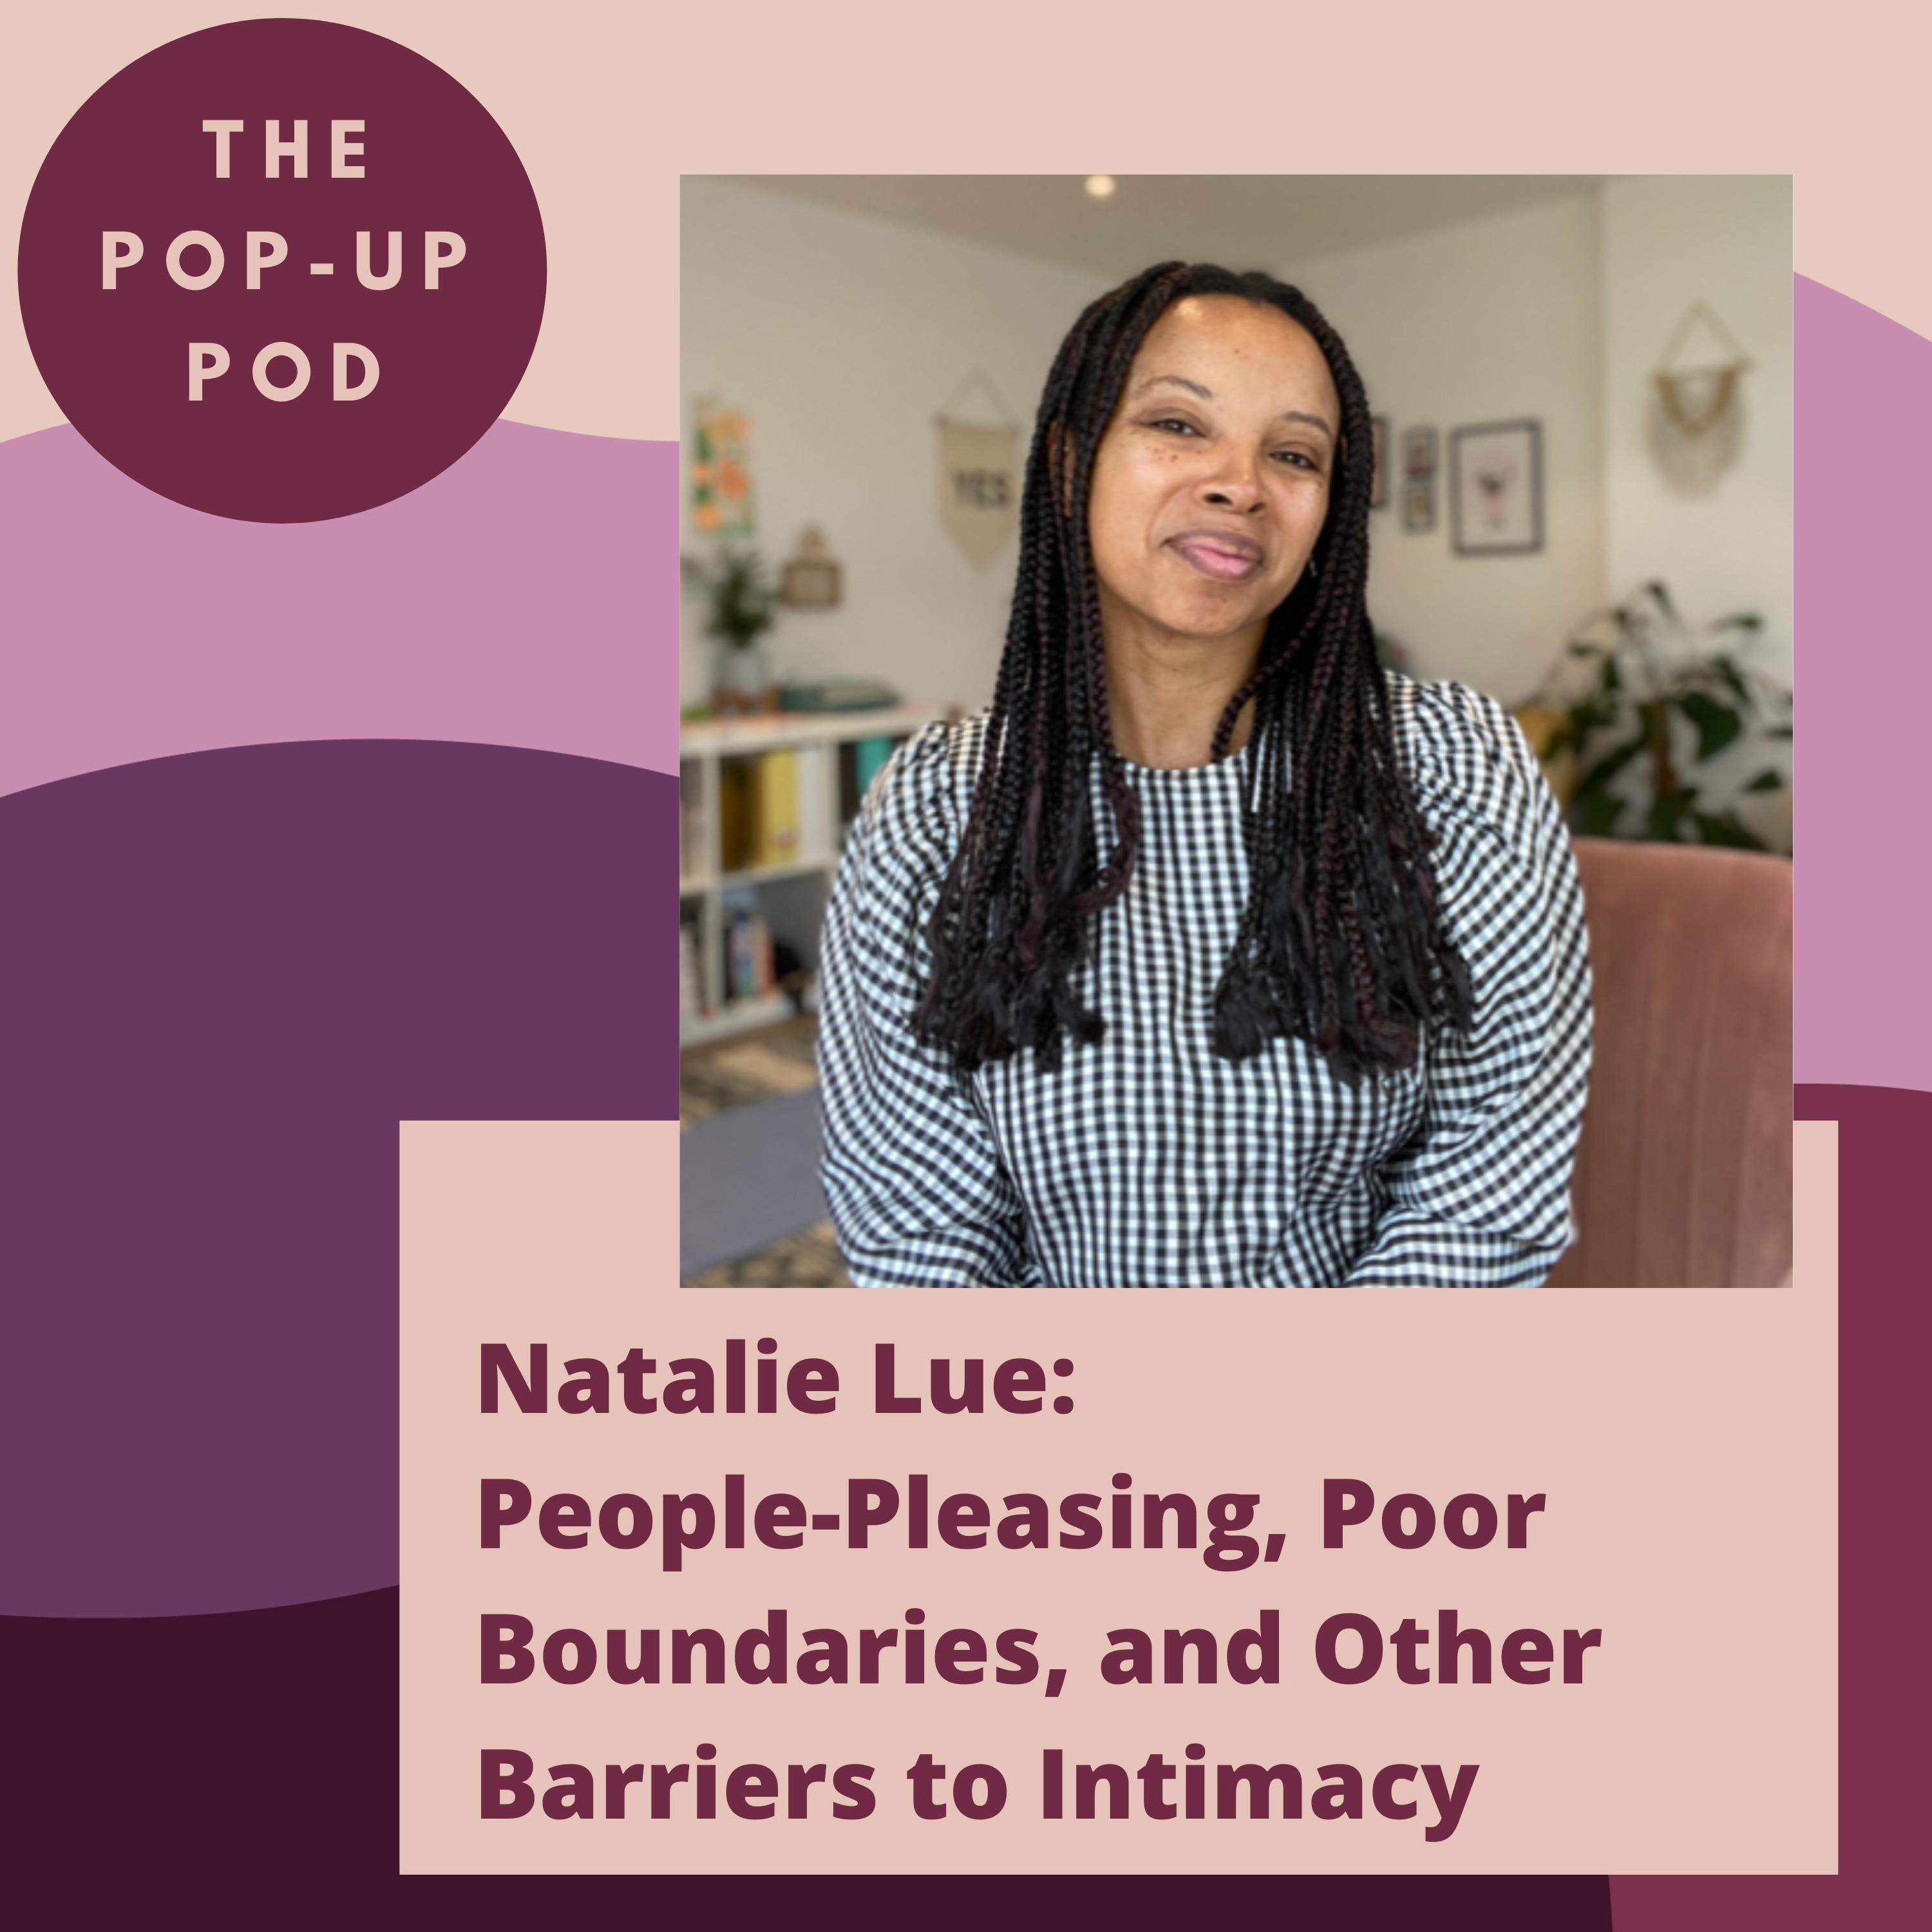 Natalie Lue: People-Pleasing, Poor Boundaries, and Other Barriers to Intimacy